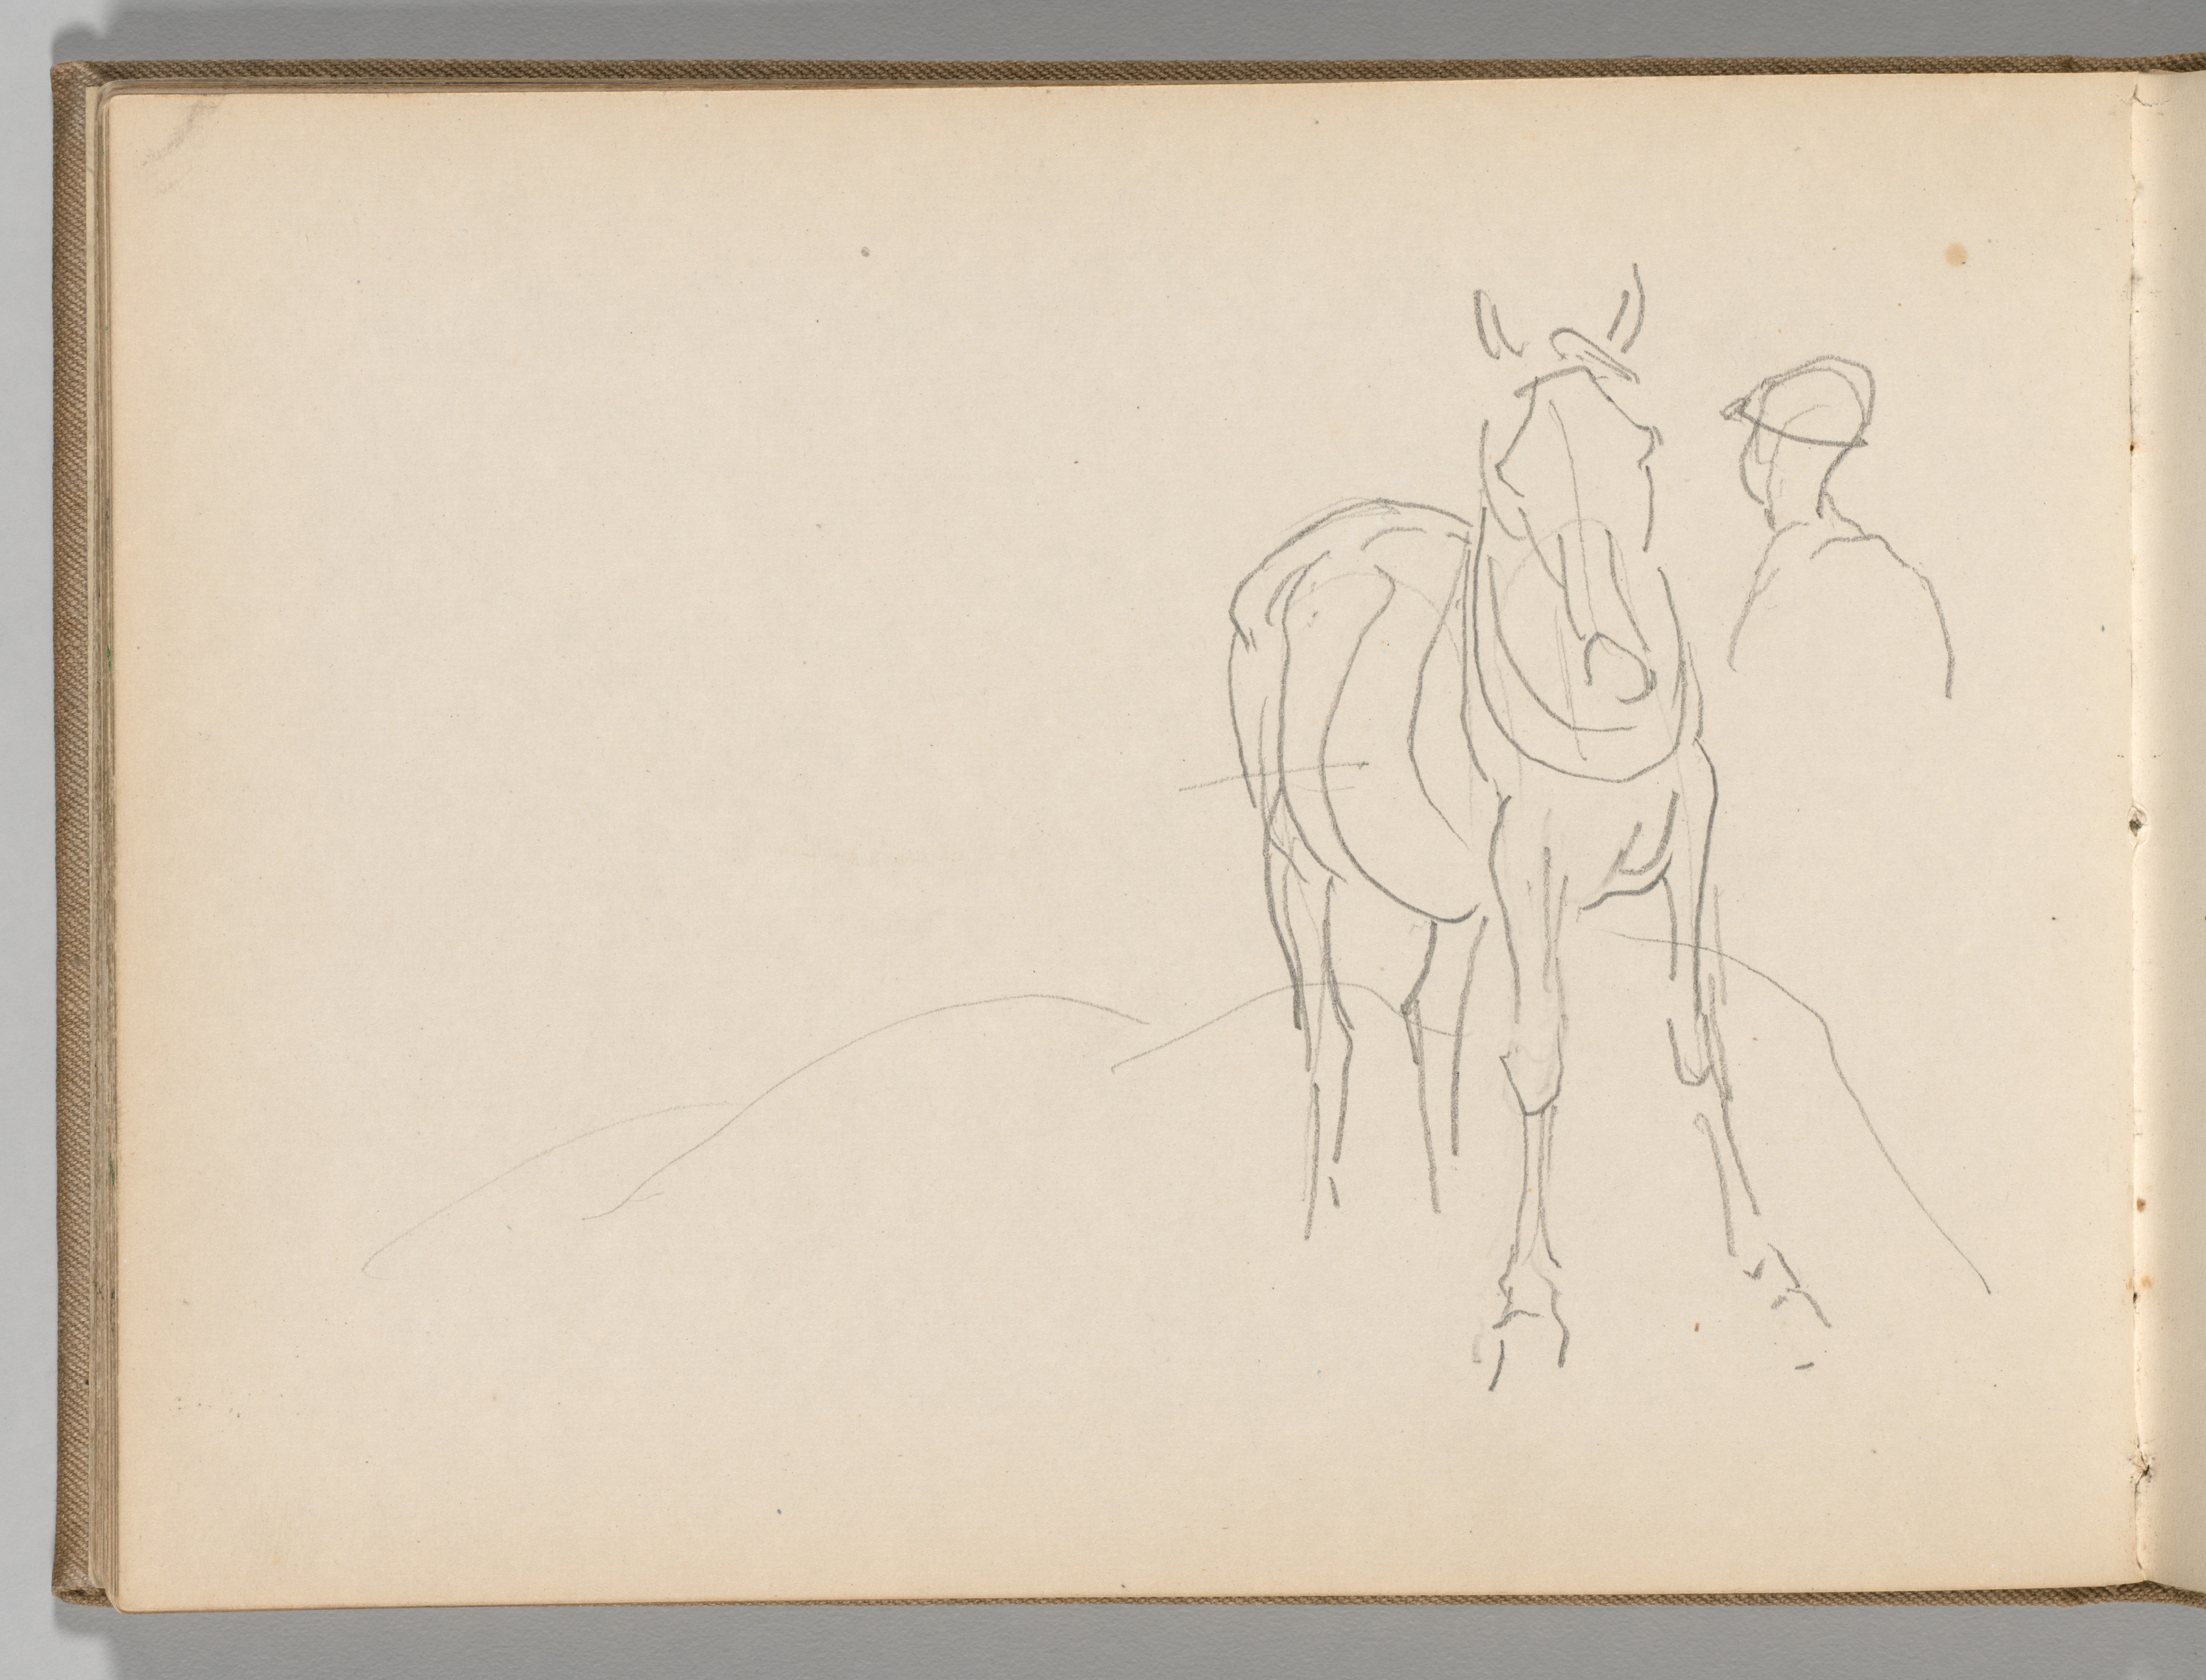 Sketchbook, Spain: Page 29: Sketch of a Figure with a Horse, c. 1922